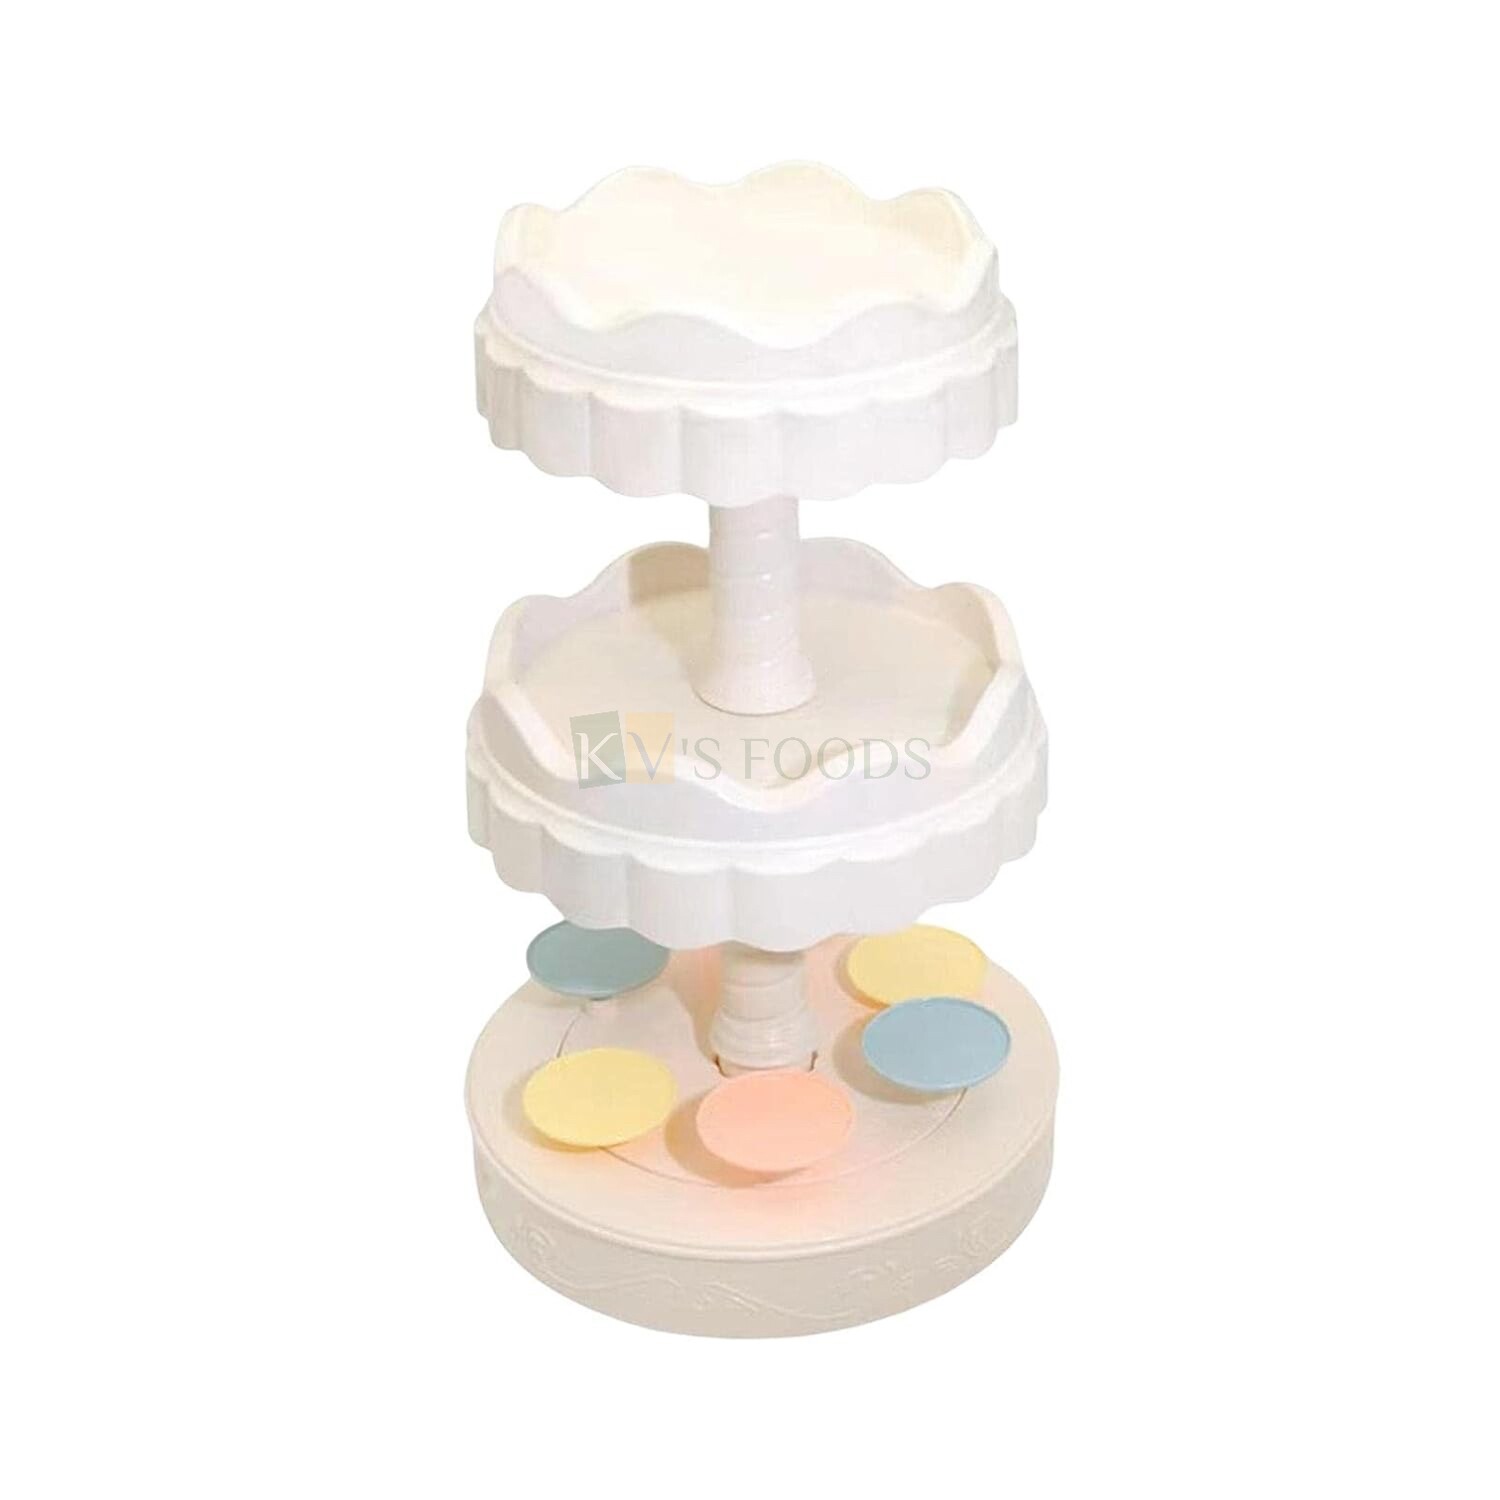 3 Tiers Auto 360 Degree Rotating Cake Stand 6PC Cupcake, Macaroon Dessert Plates Display Go Round Party Decoration Carousel Cake Machine Small Rotary Automatic Revolving Dessert Cake Booth Rack Stand